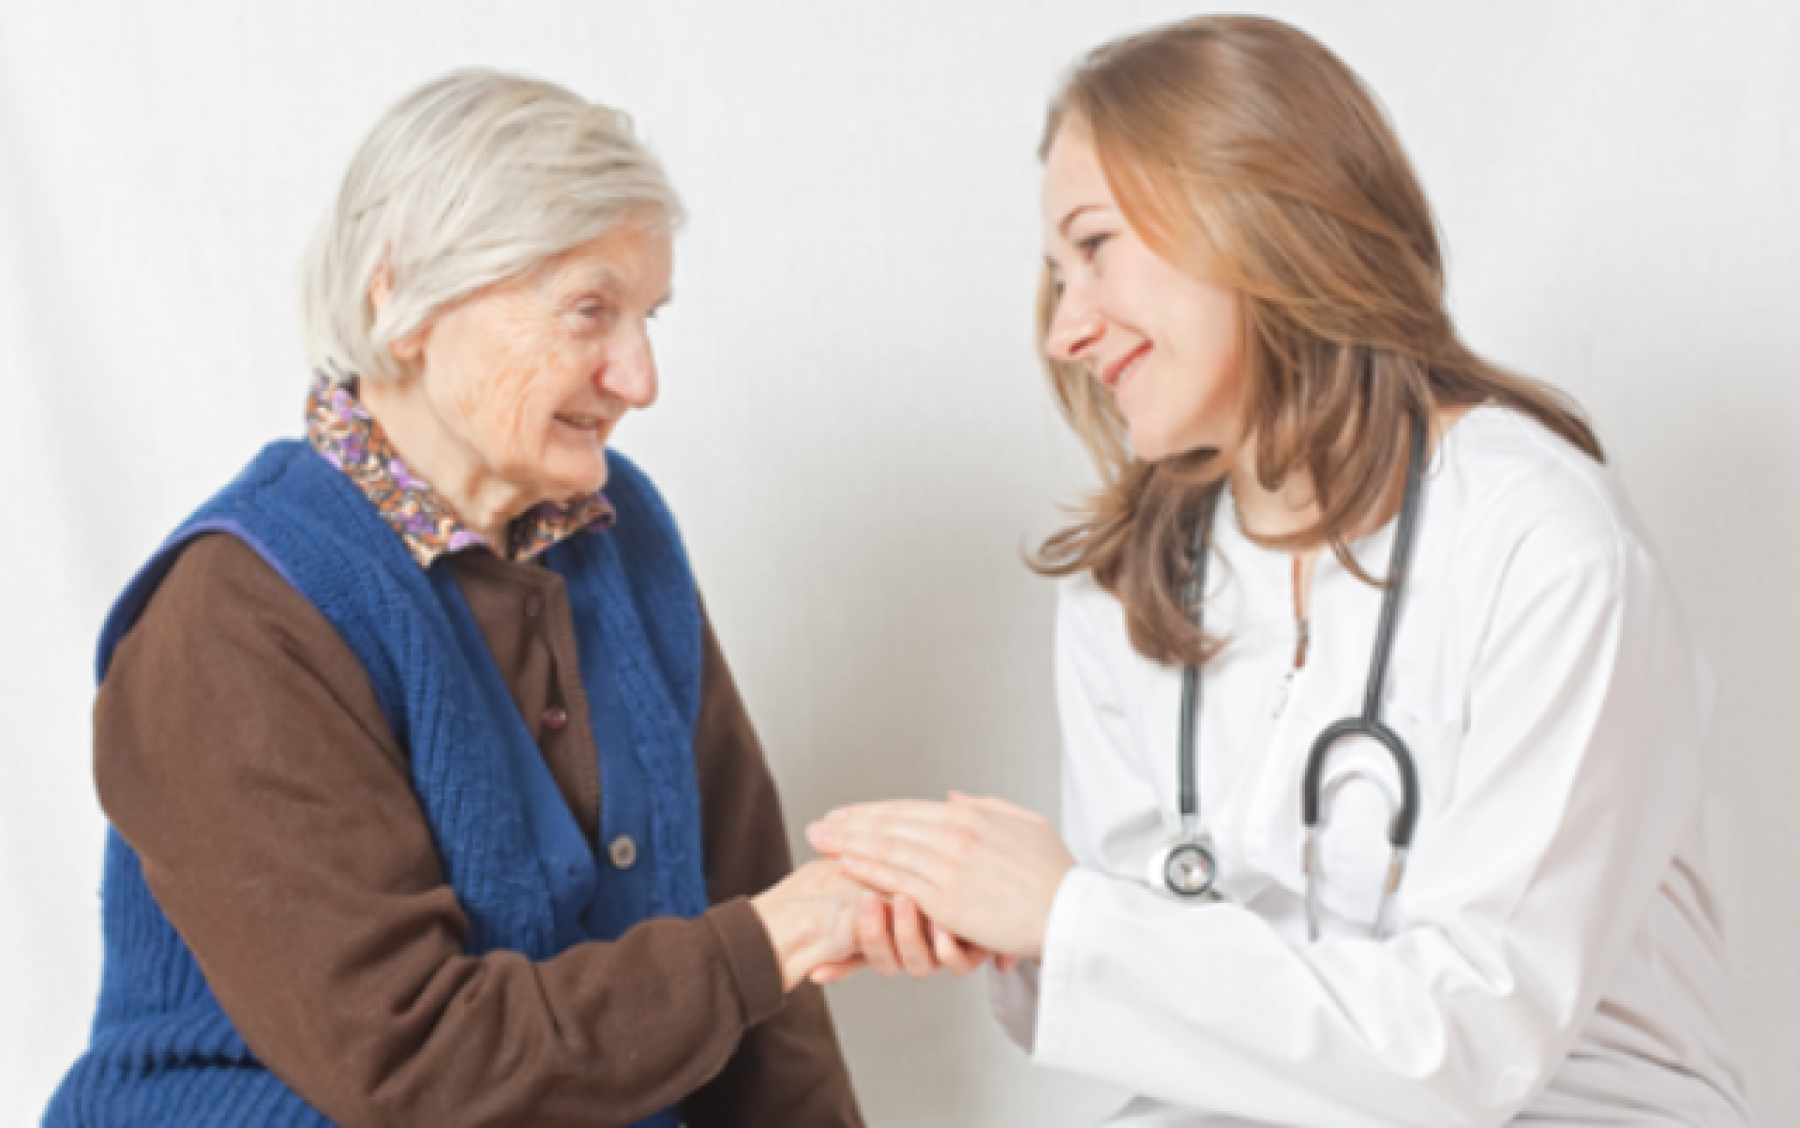 Older adult woman talking with younger female doctor, doctor looks caring and has her hands on the woman's hands.